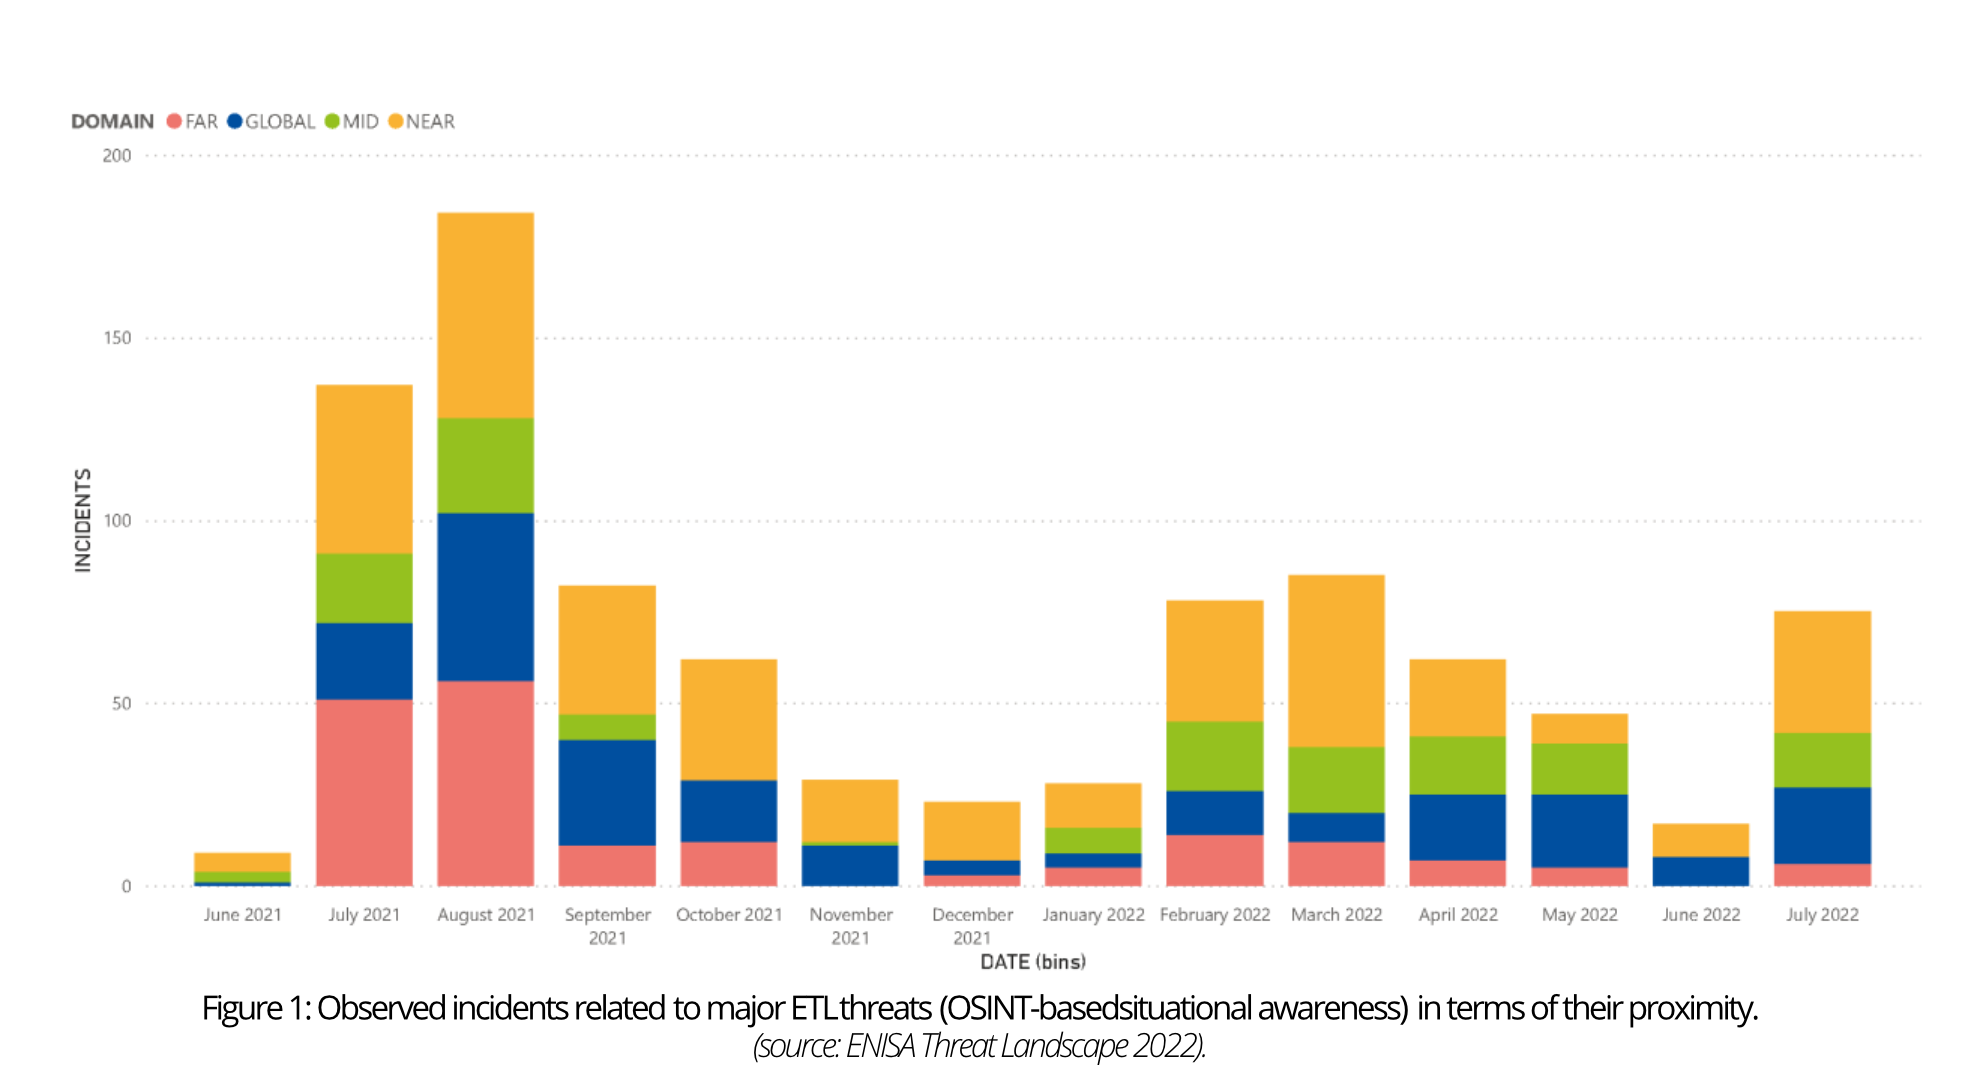 Figure 2: Observed incidents related to major ETL threats (OSINT-based situational awareness) in terms of their proximity.